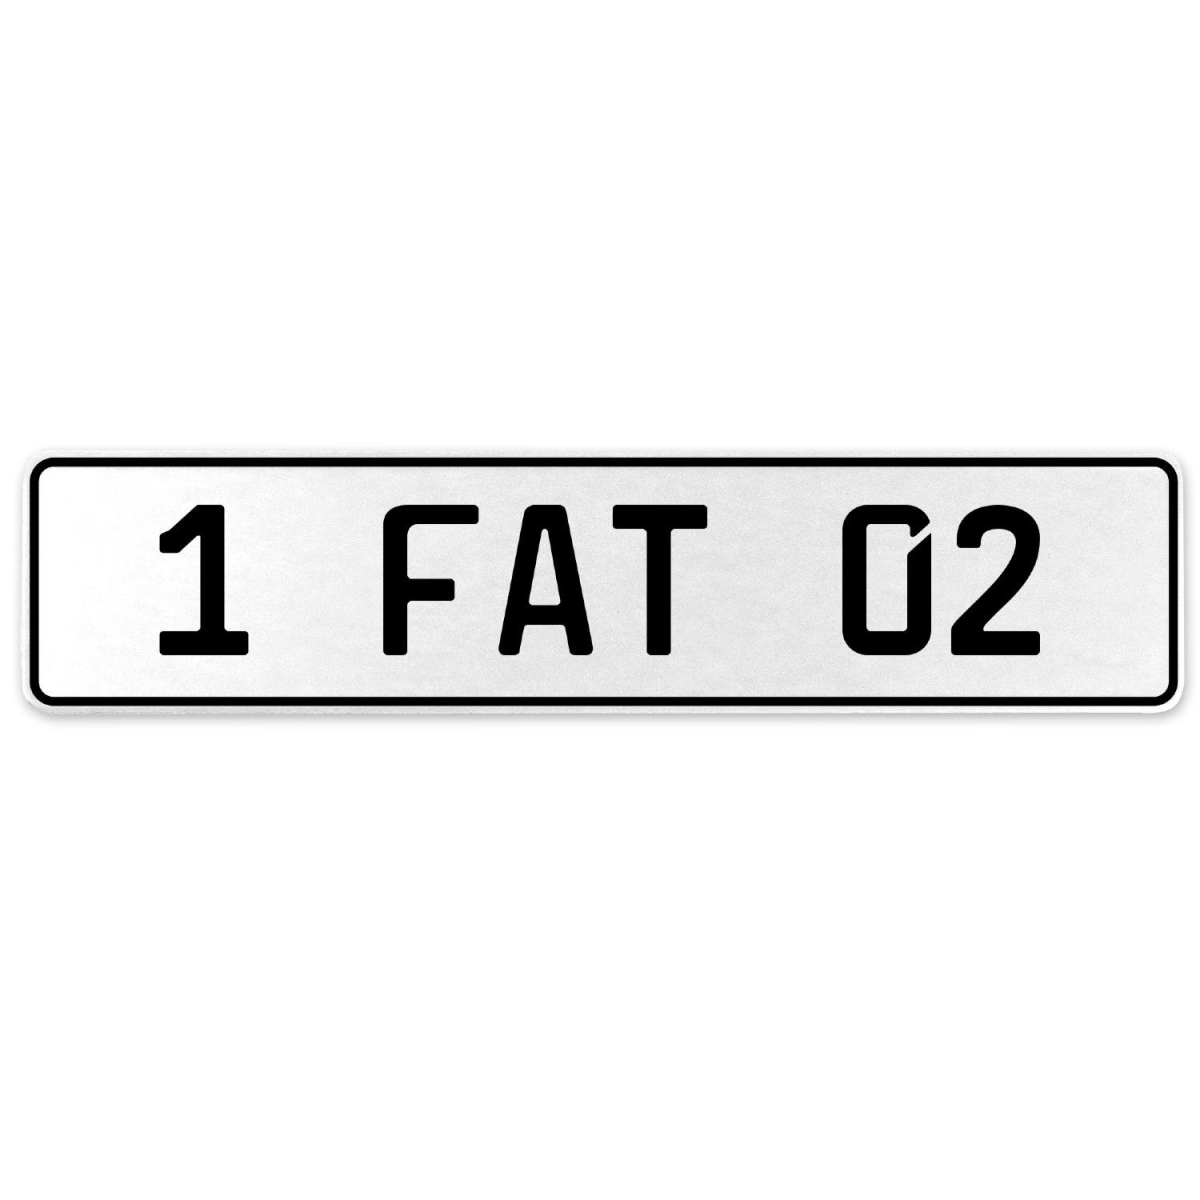 554599 1 Fat 02 - White Aluminum Street Sign Mancave Euro Plate Name Door Sign Wall